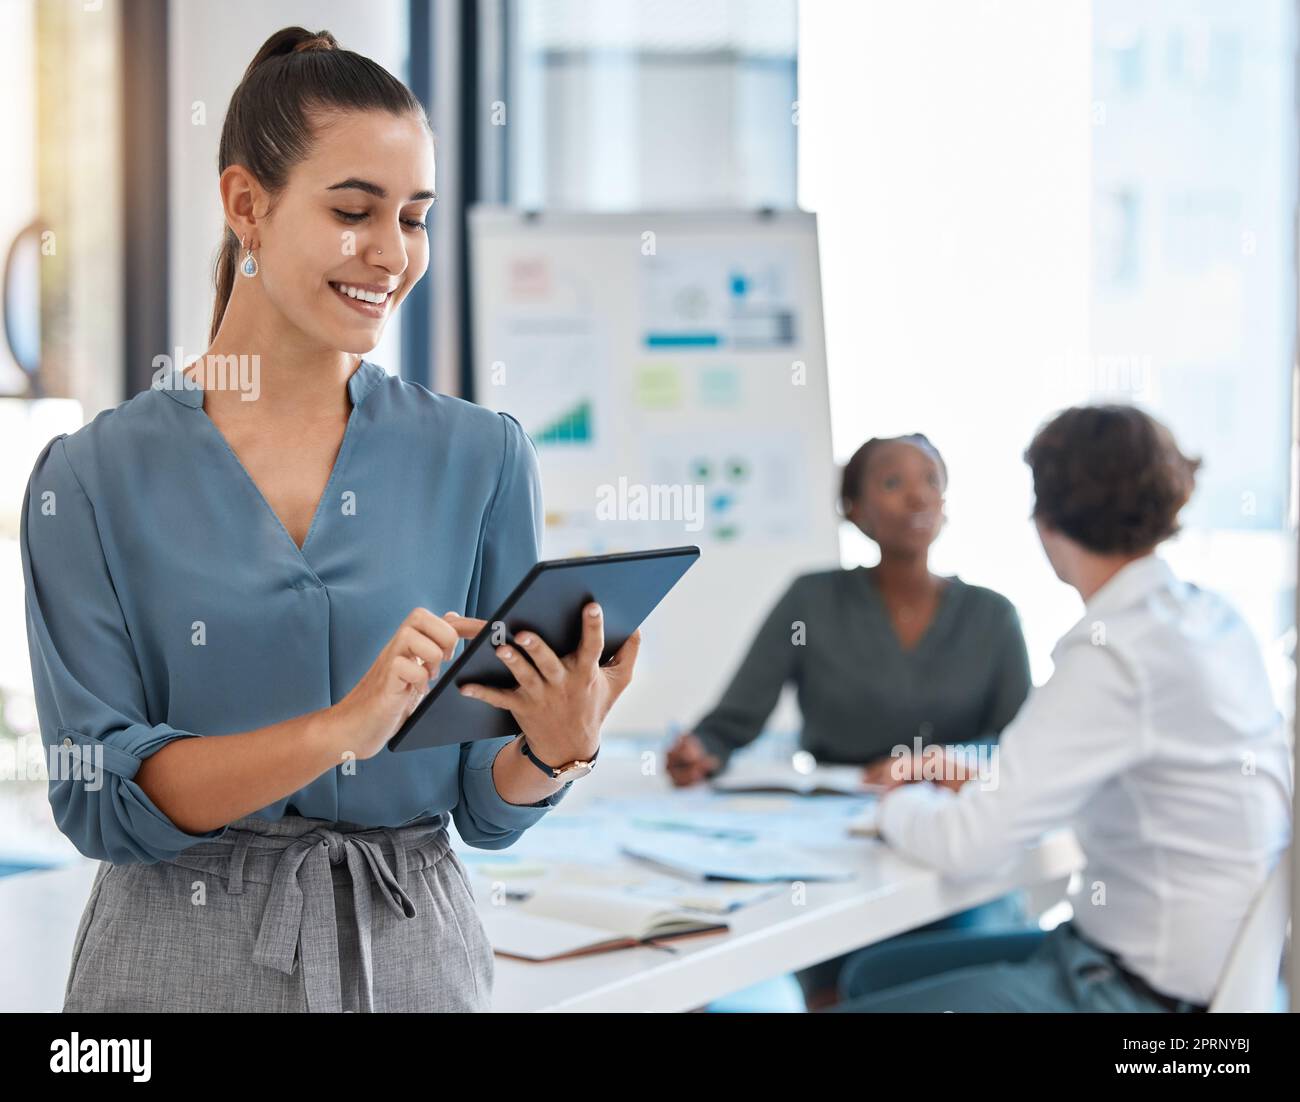 Leadership, management and leader with tablet working on future innovation idea and analyzing data. Collaboration, teamwork and planning at strategy business meeting with diversity team and graphs Stock Photo